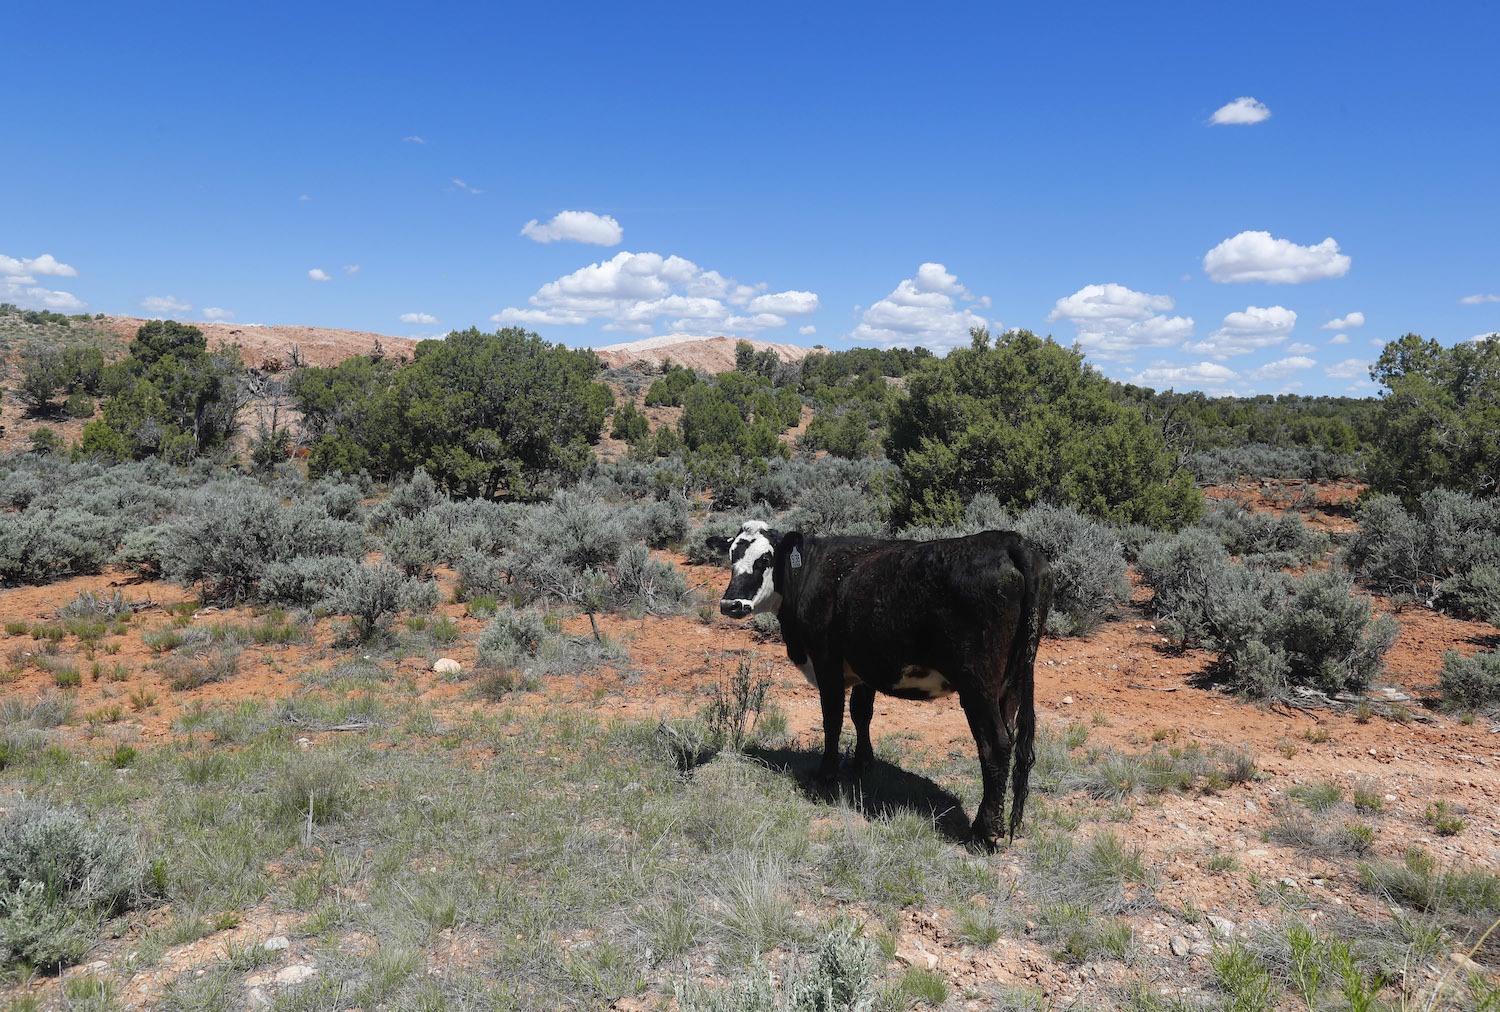 A cow grazes on the land in the Bears Ears National Monument on May 12, 2017 outside Blanding, Utah.